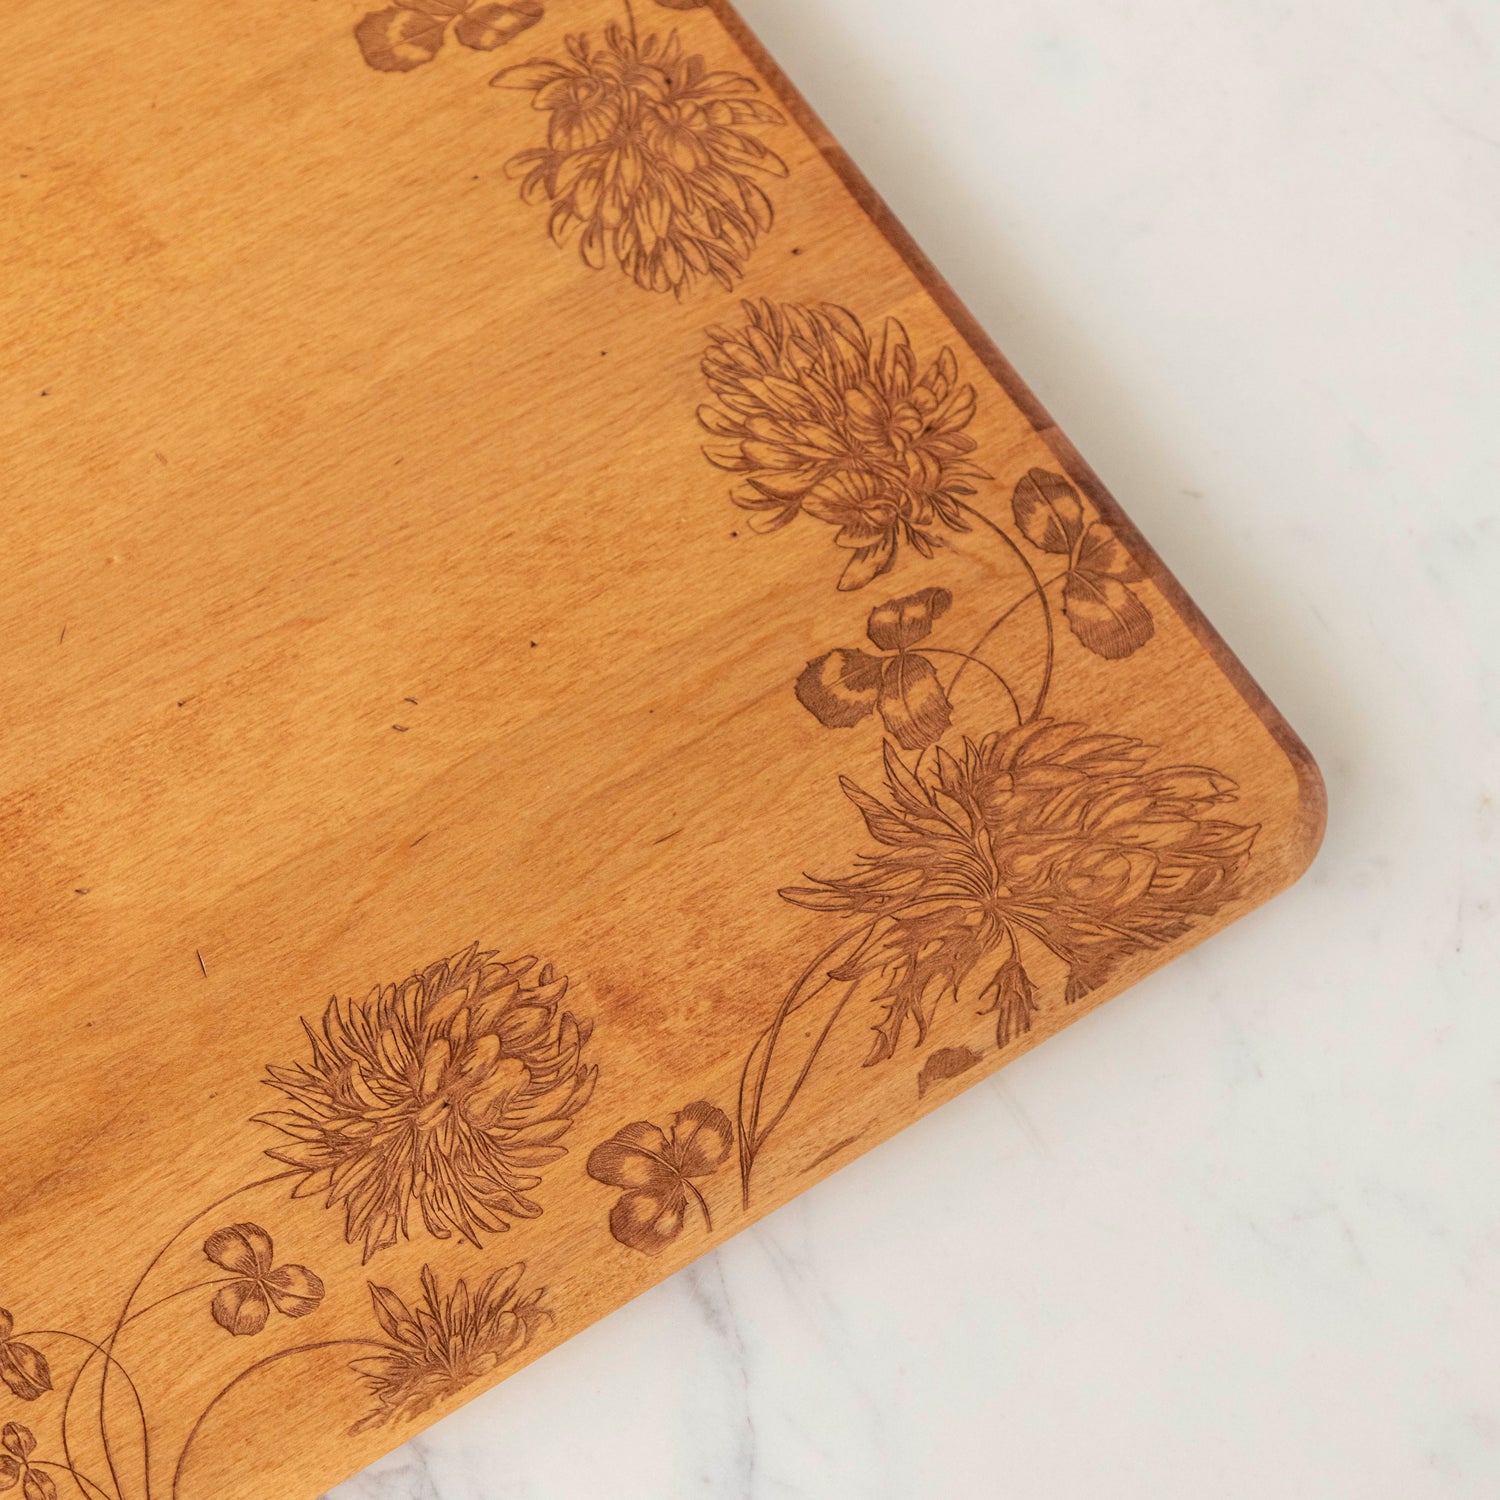 24 x 14 x 0.6 in maple artisan charcuterie board with heirloom distressed finish and hand-engraved clovers on a white background.